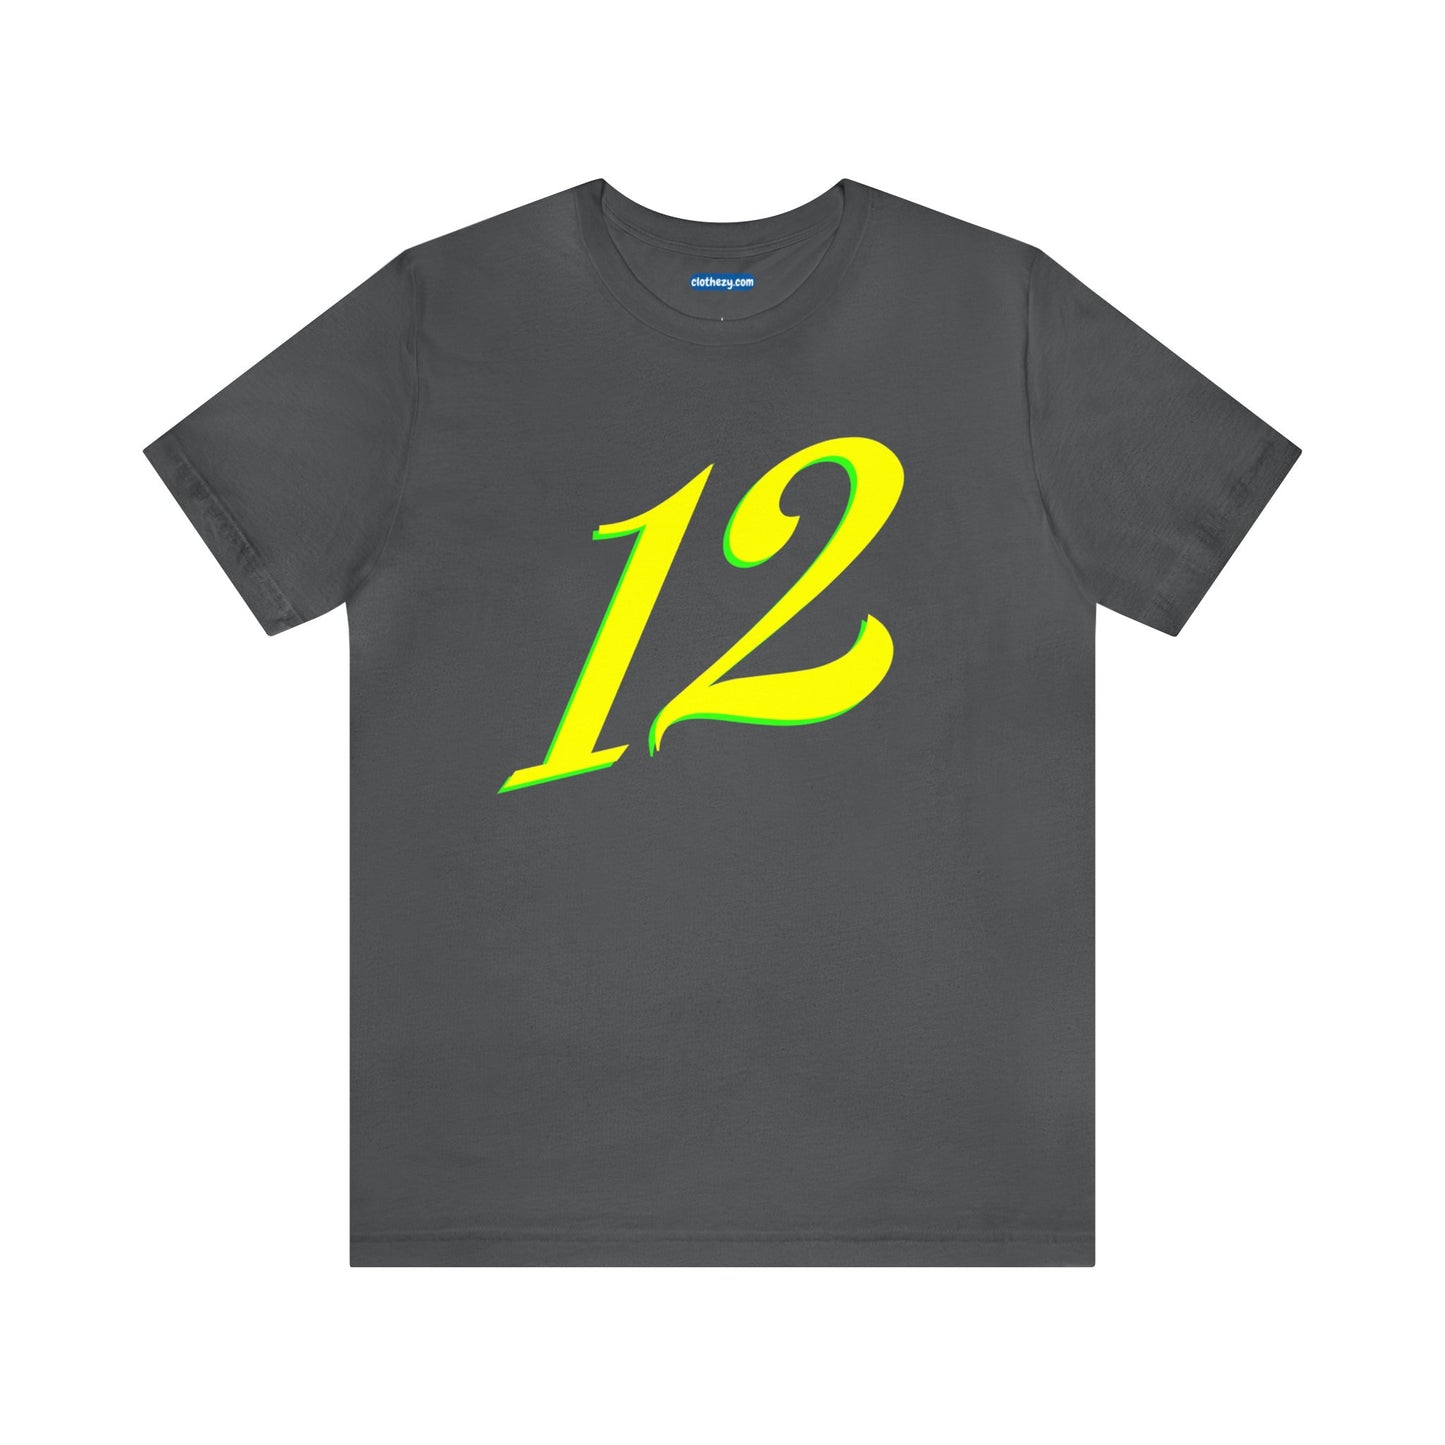 Number 12 Design - Soft Cotton Tee for birthdays and celebrations, Gift for friends and family, Multiple Options by clothezy.com in Black Size Small - Buy Now